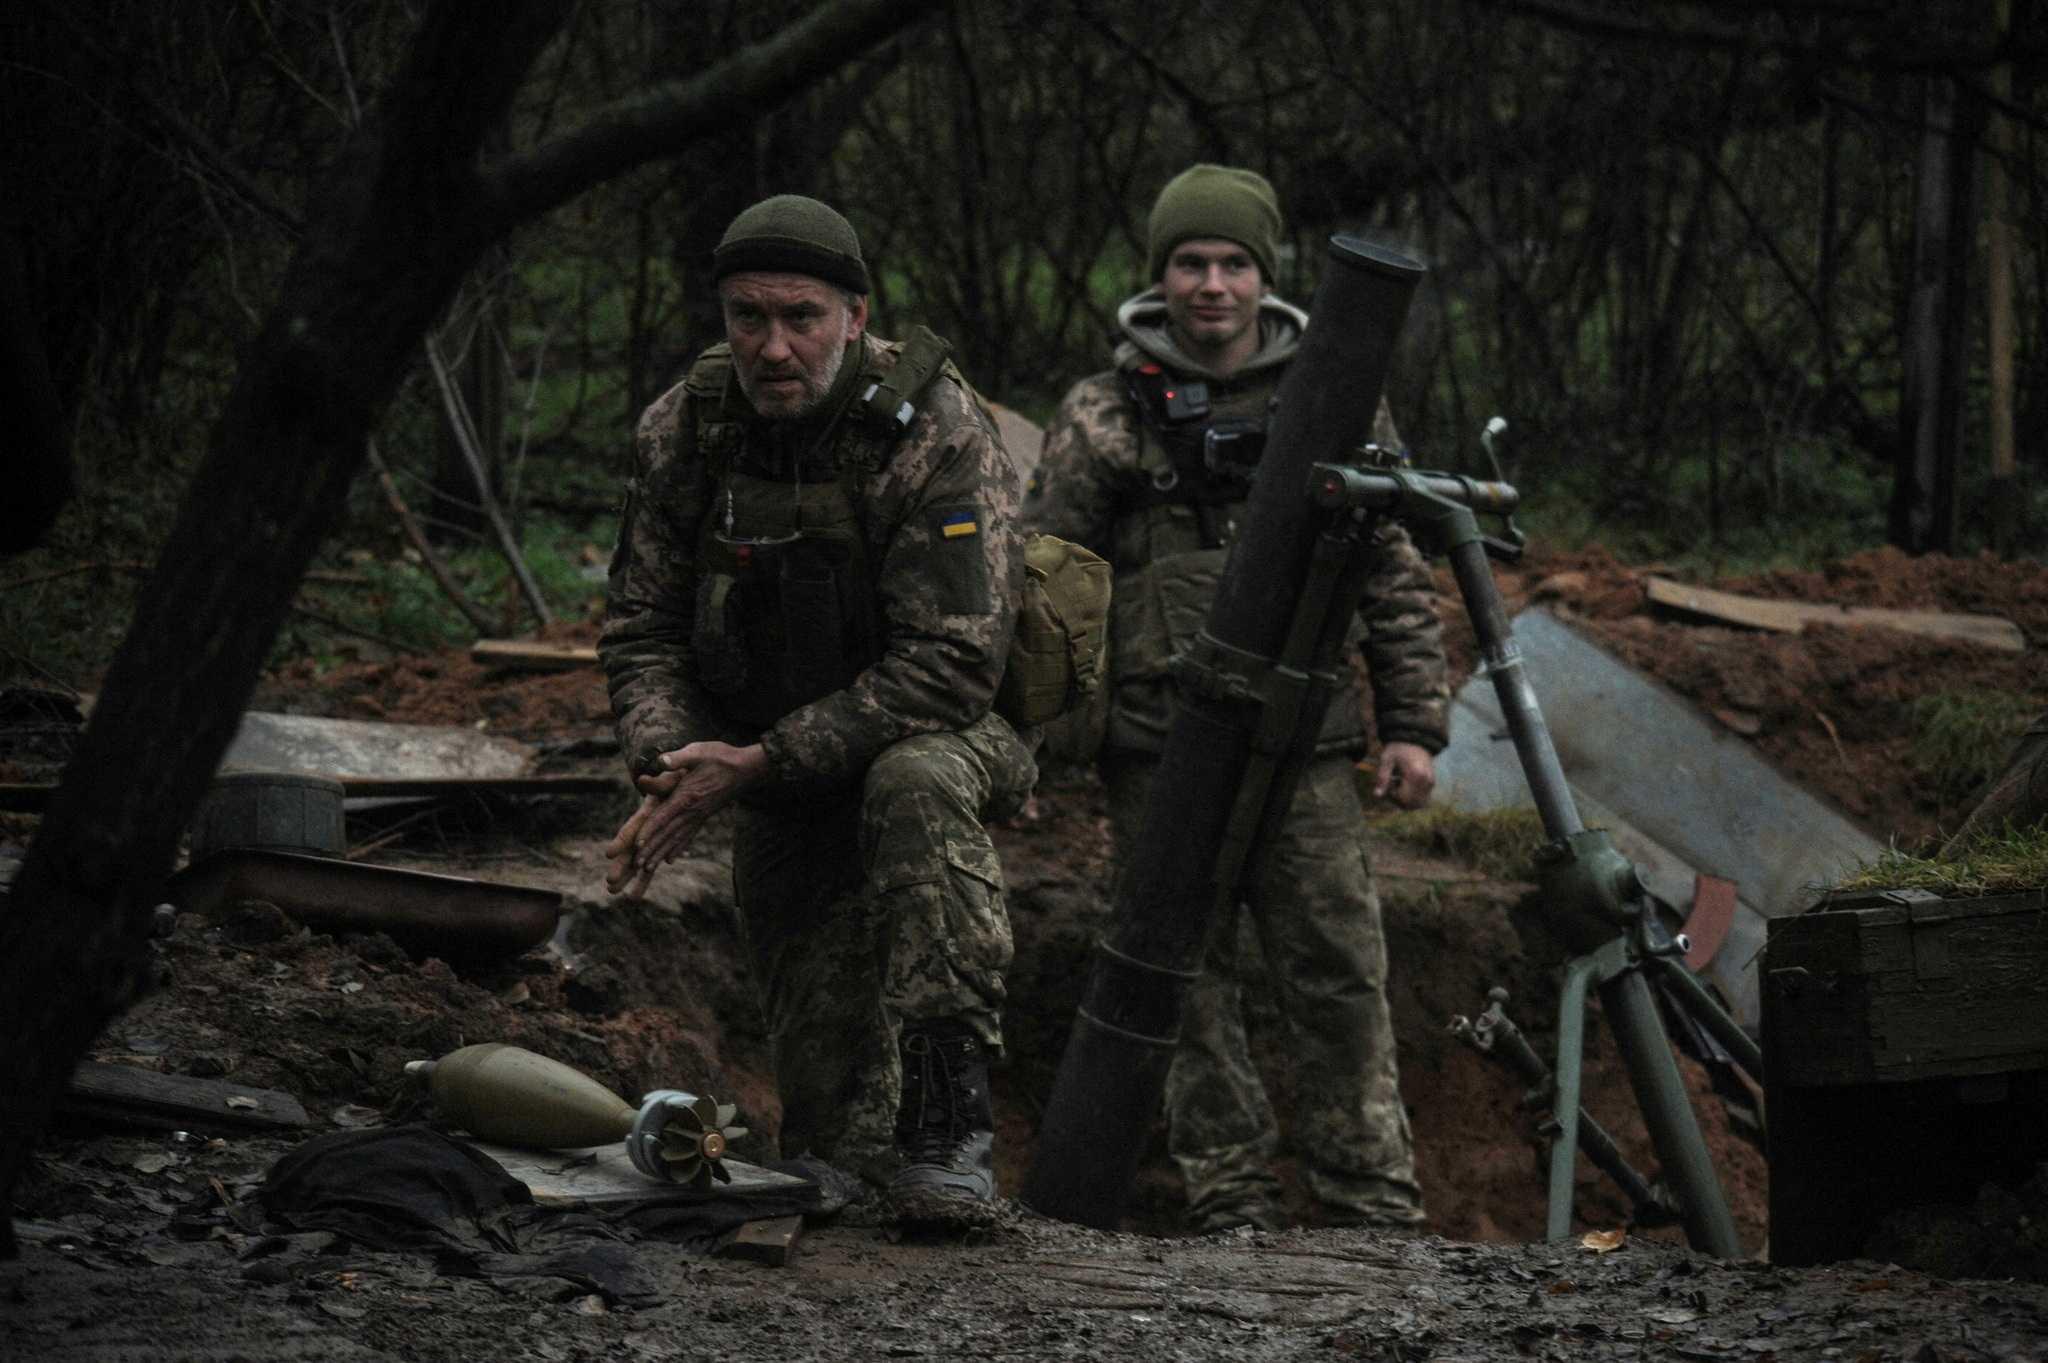 Ukrainian servicemen fire a mortar on a front line, as Russia's attack on Ukraine continues, in Donetsk region, Ukraine, in this handout image released Nov 20. Photo: Reuters